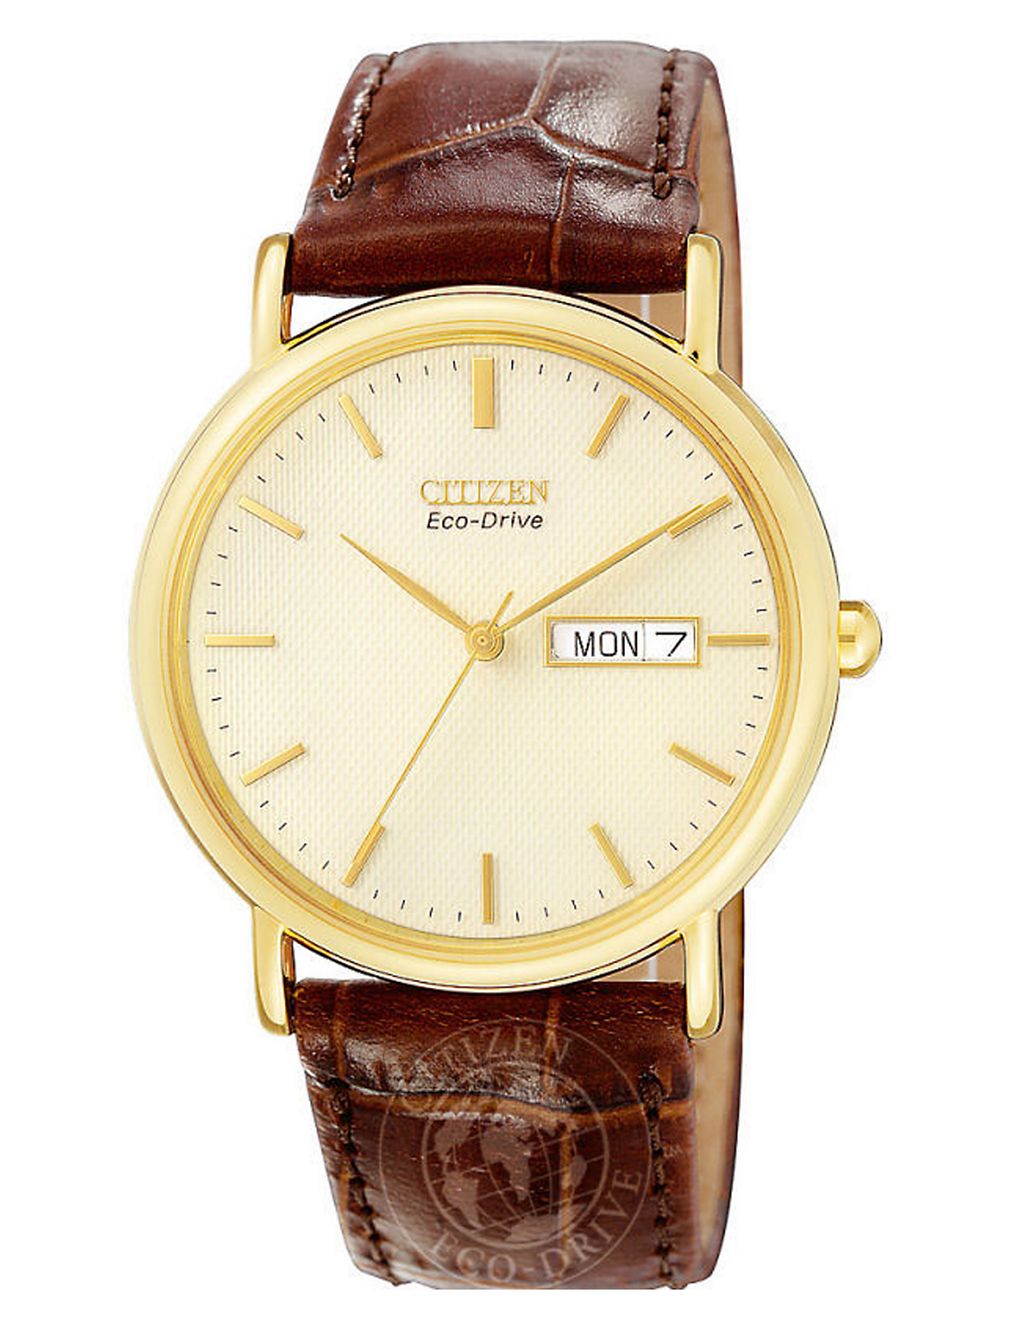 Citzen Eco-Drive Classic Brown Leather Watch 1 of 2